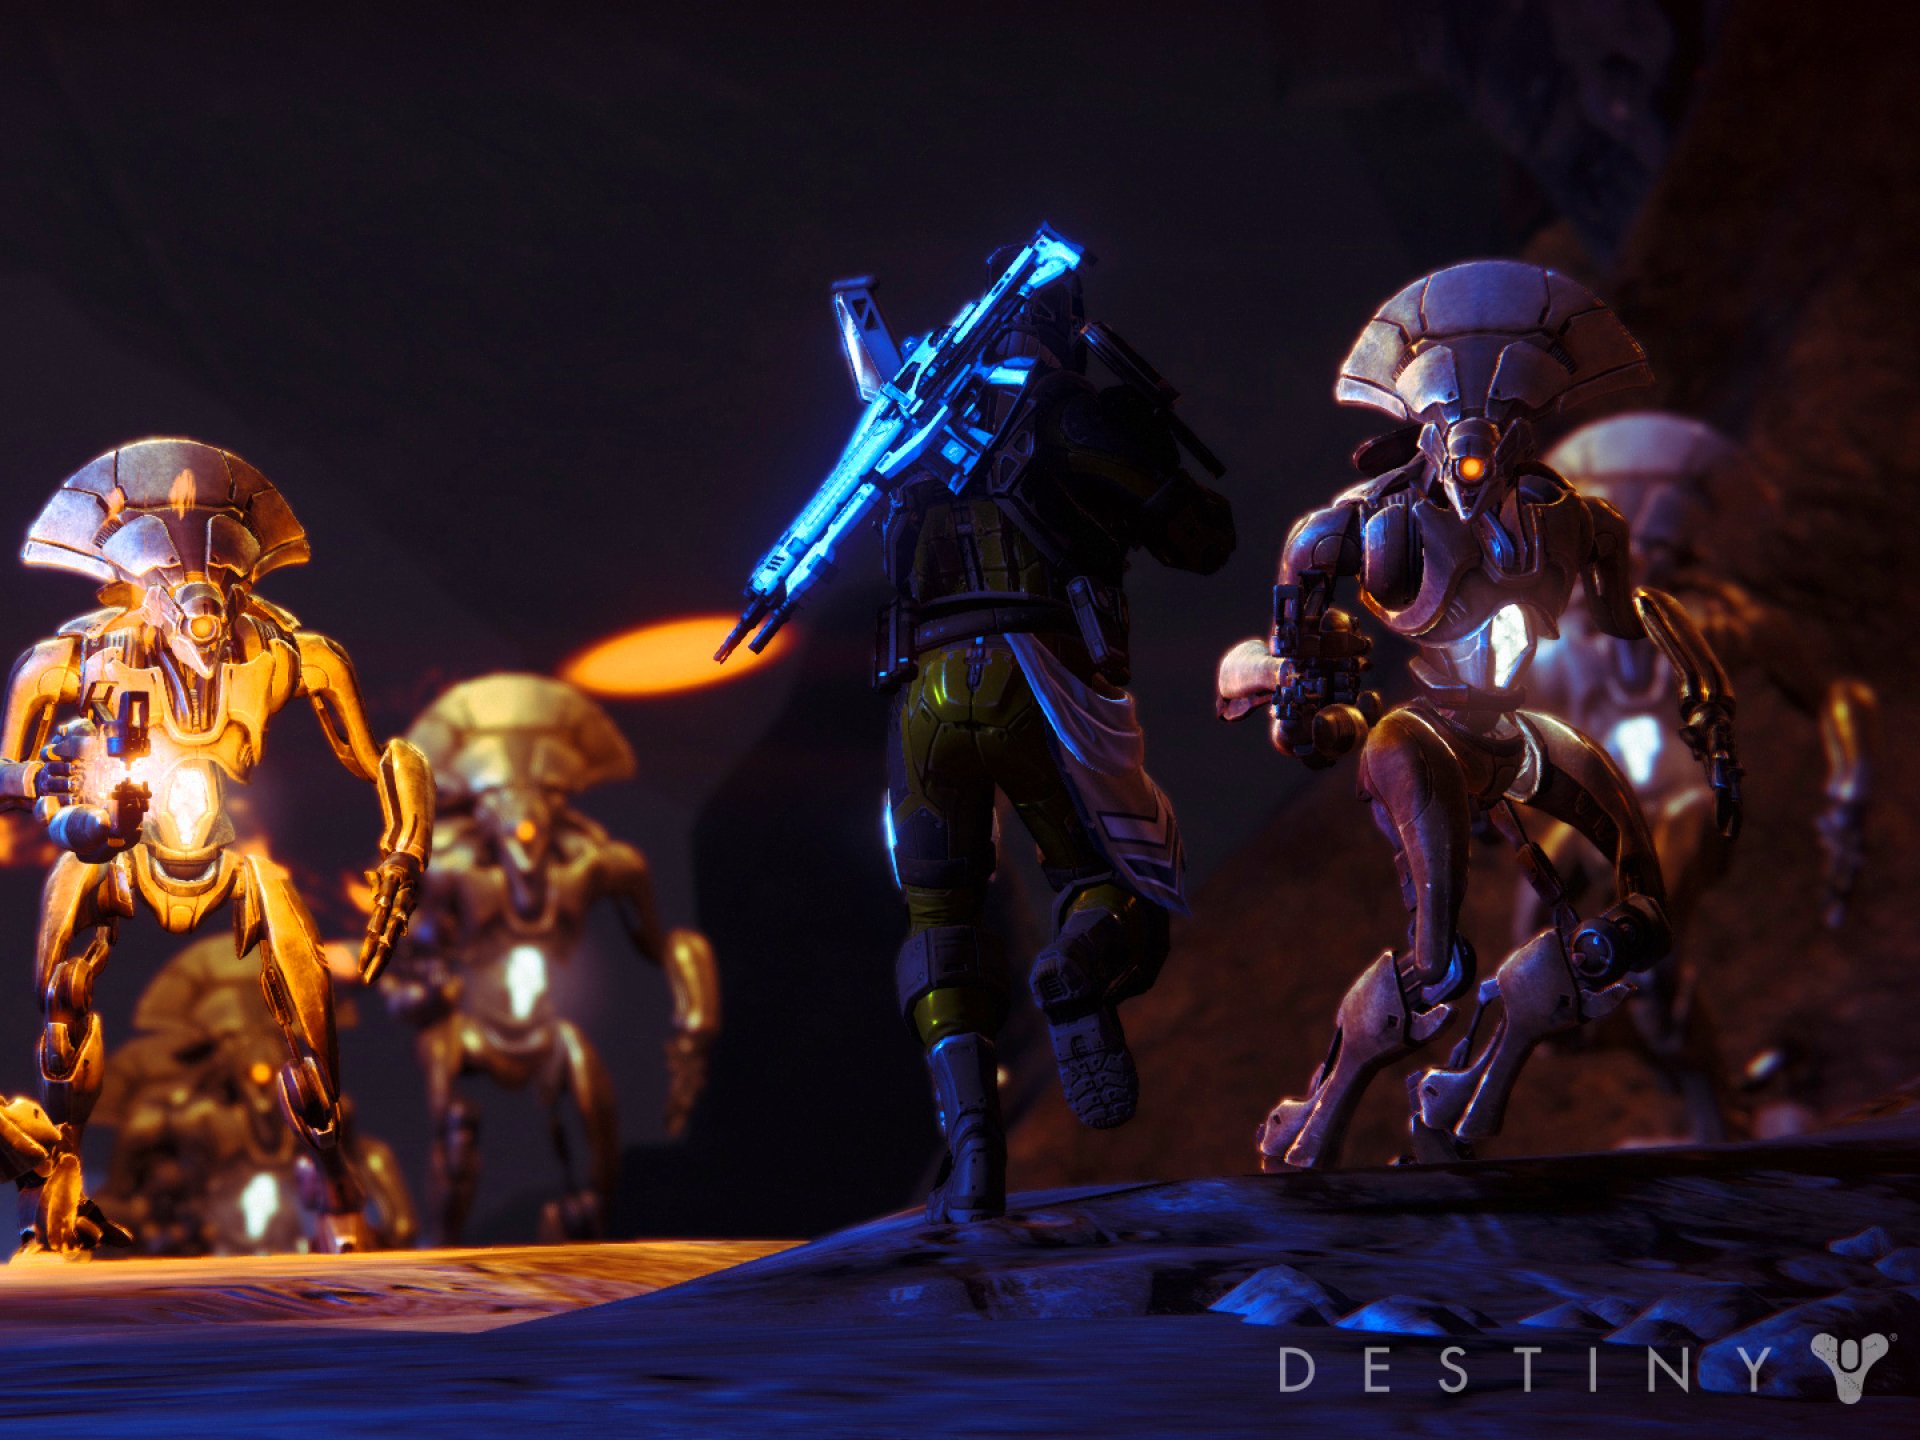 destiny, Sci fi, Shooter, Fps, Action, Fighting, Futuristic, Warrior, Fantasy, Mmo, Online, Rpg, Poster Wallpaper